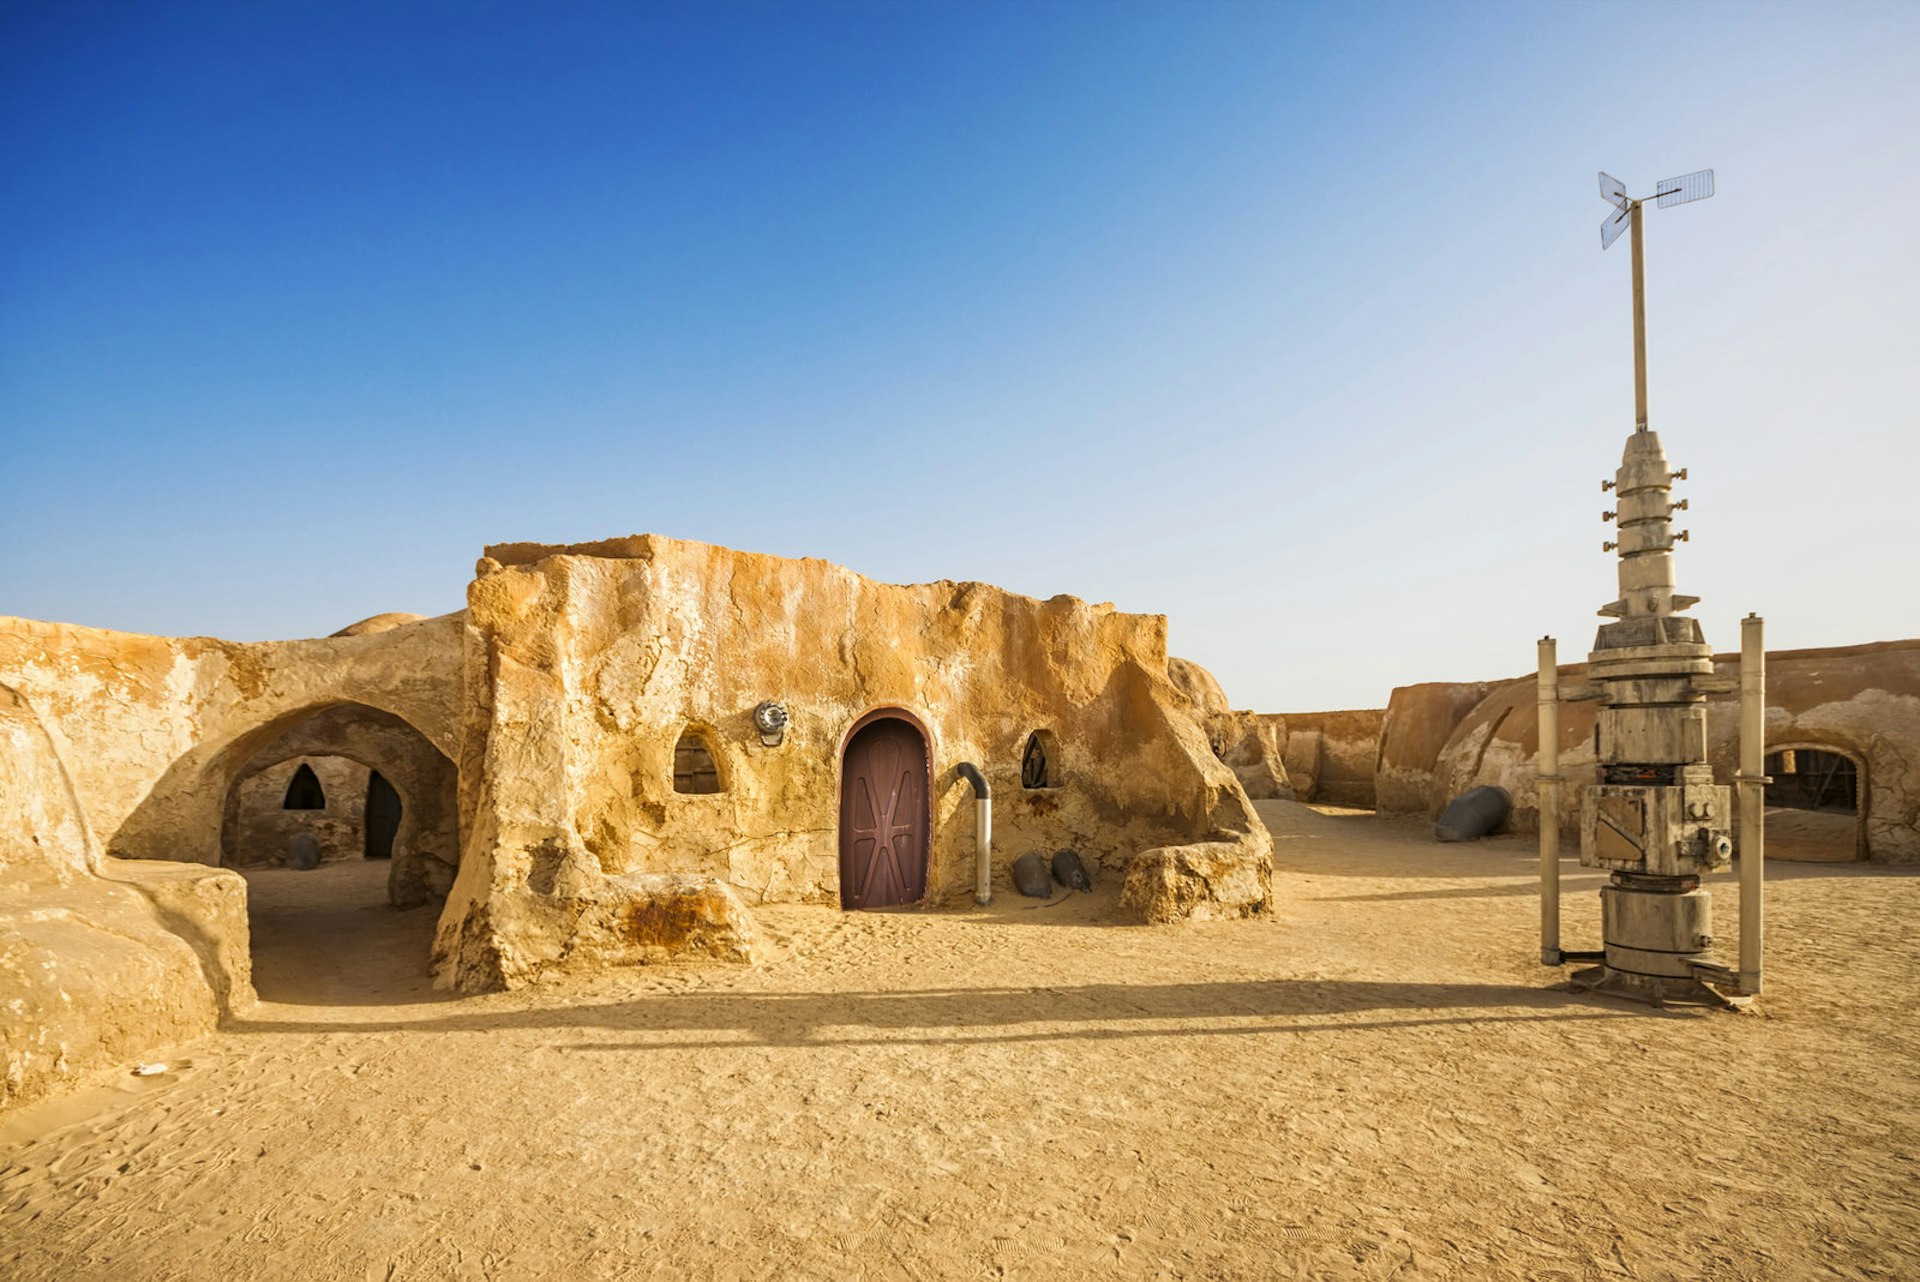 Abandoned sets for the shooting of the movie Star Wars in the Sahara desert on a background of sand dunes in Tunisia